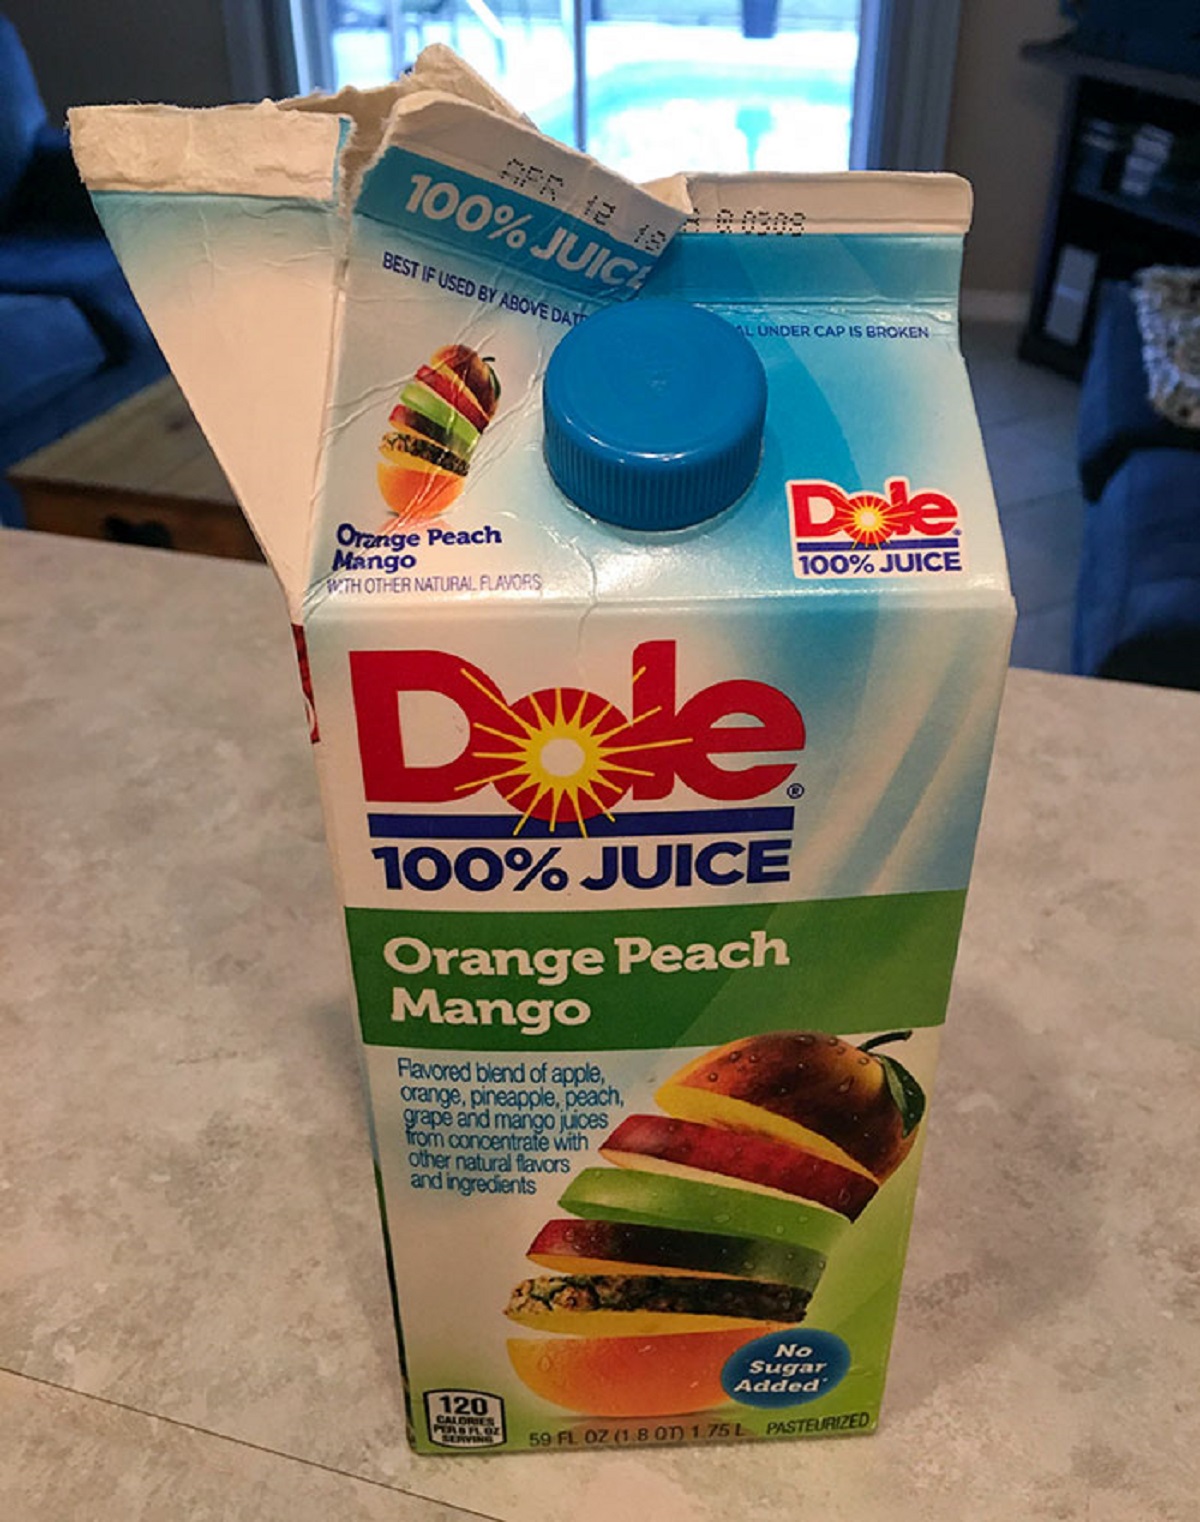 cheeseburger - 100% Juic Best Of Used By Above Gay Orange Peach Mango Hother Miral Flas Dole Dole 100% Juice 100% Juice Orange Peach Mango Favored blend of apple orange, pineapple, peach grapi and mango ices for concentrate with other ratulos, and ingredi